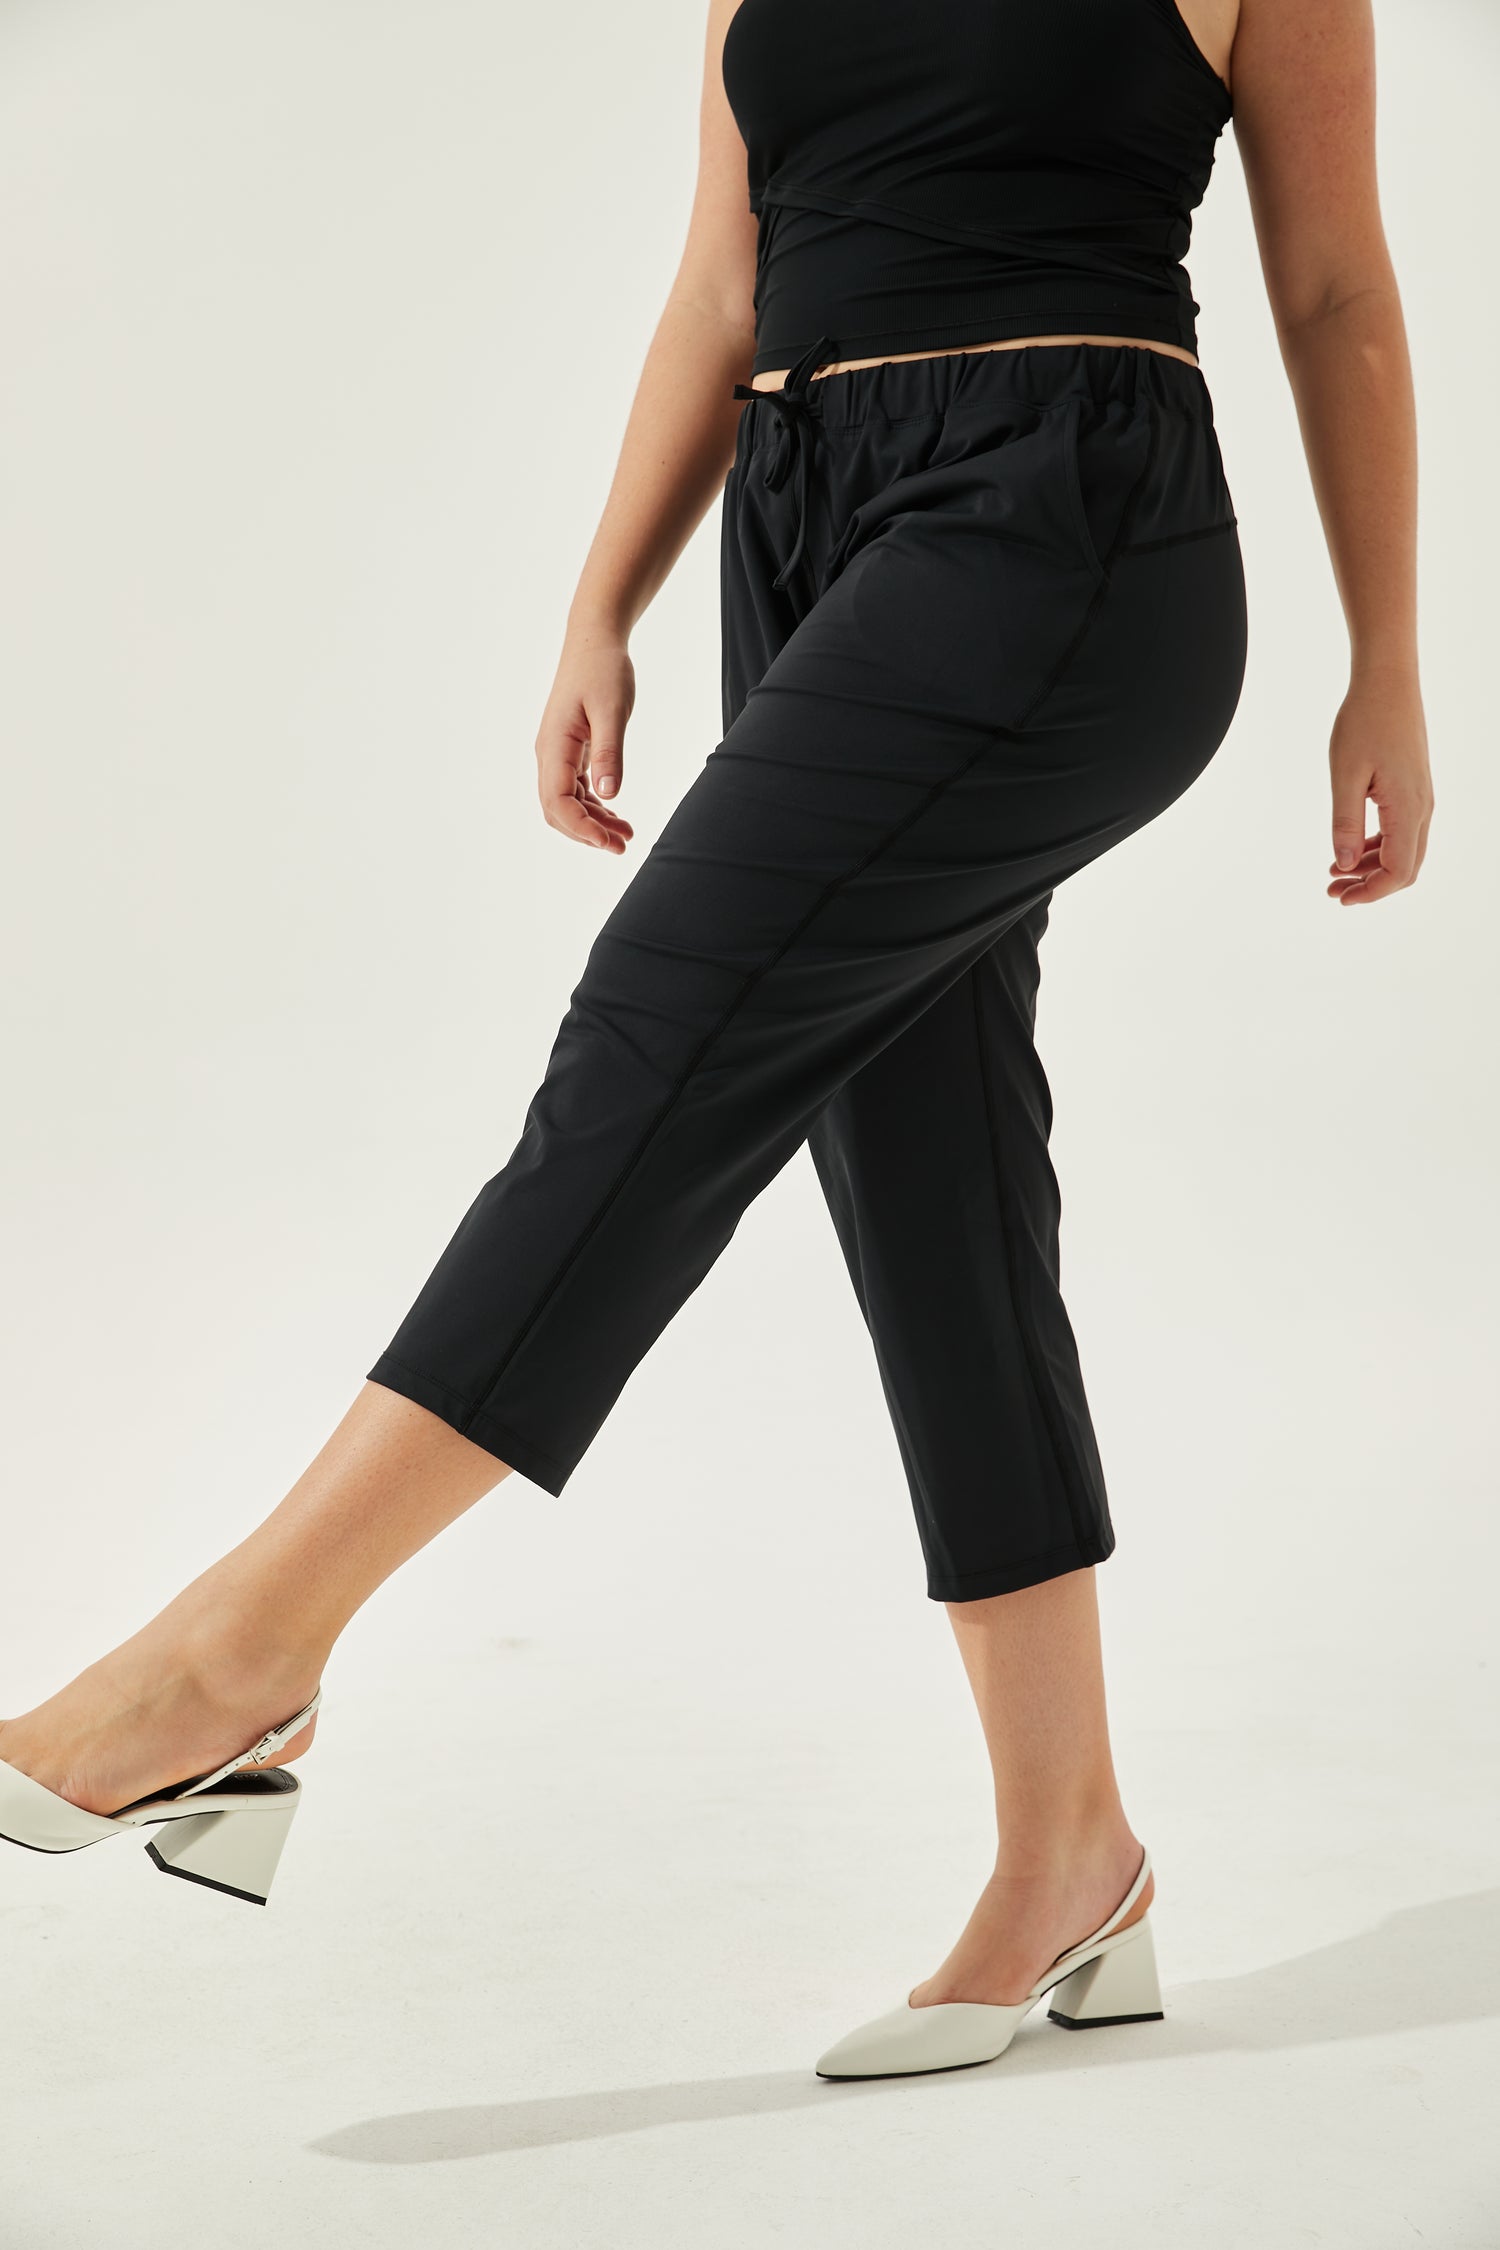 Buy 1 Get 1 Free - Silky Soft & Cooling Tranquil Pants *Final Pieces*